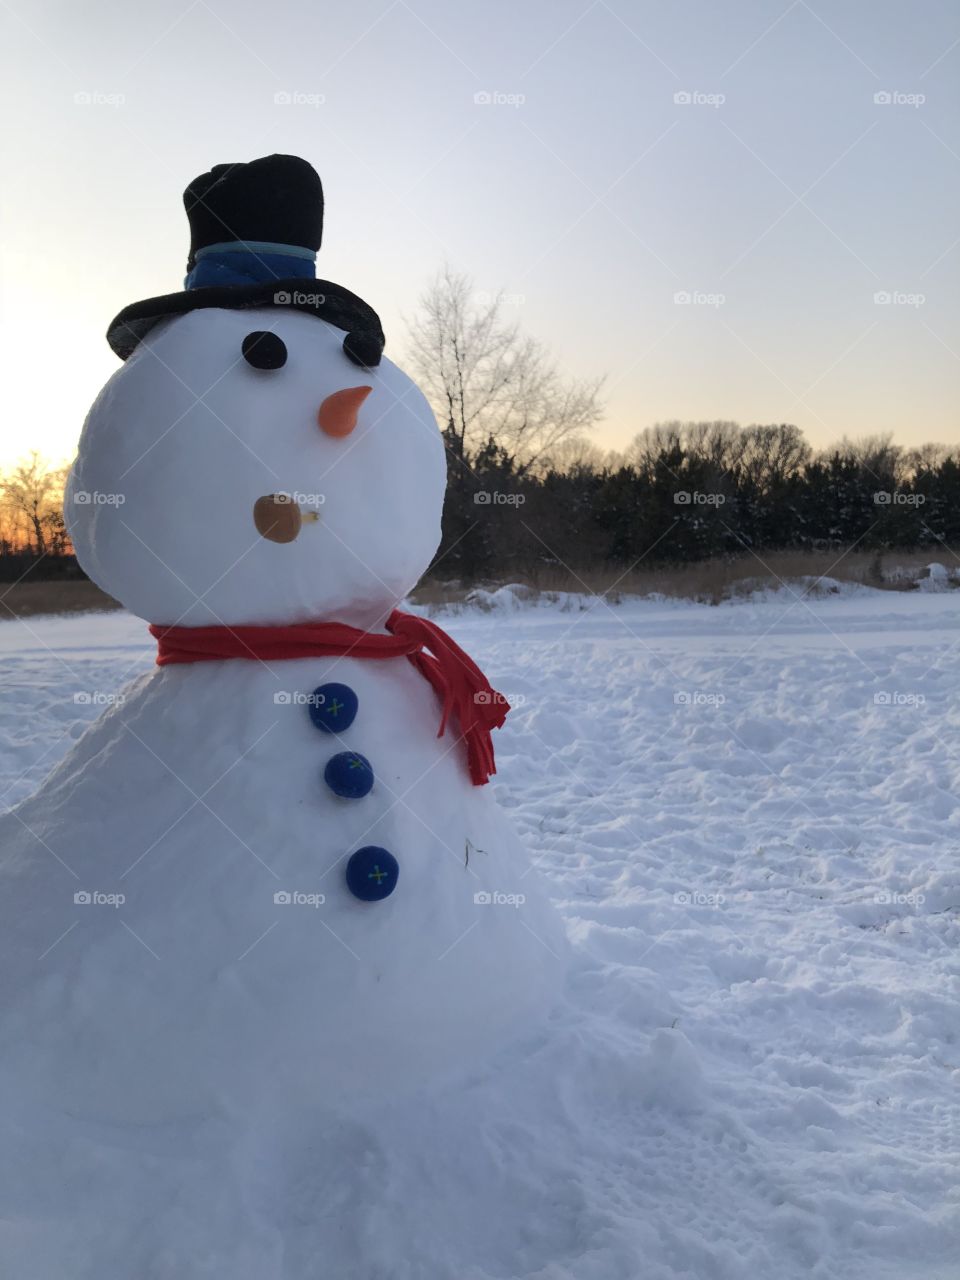 Lumpy snowman and sunset background in Wisconsin 